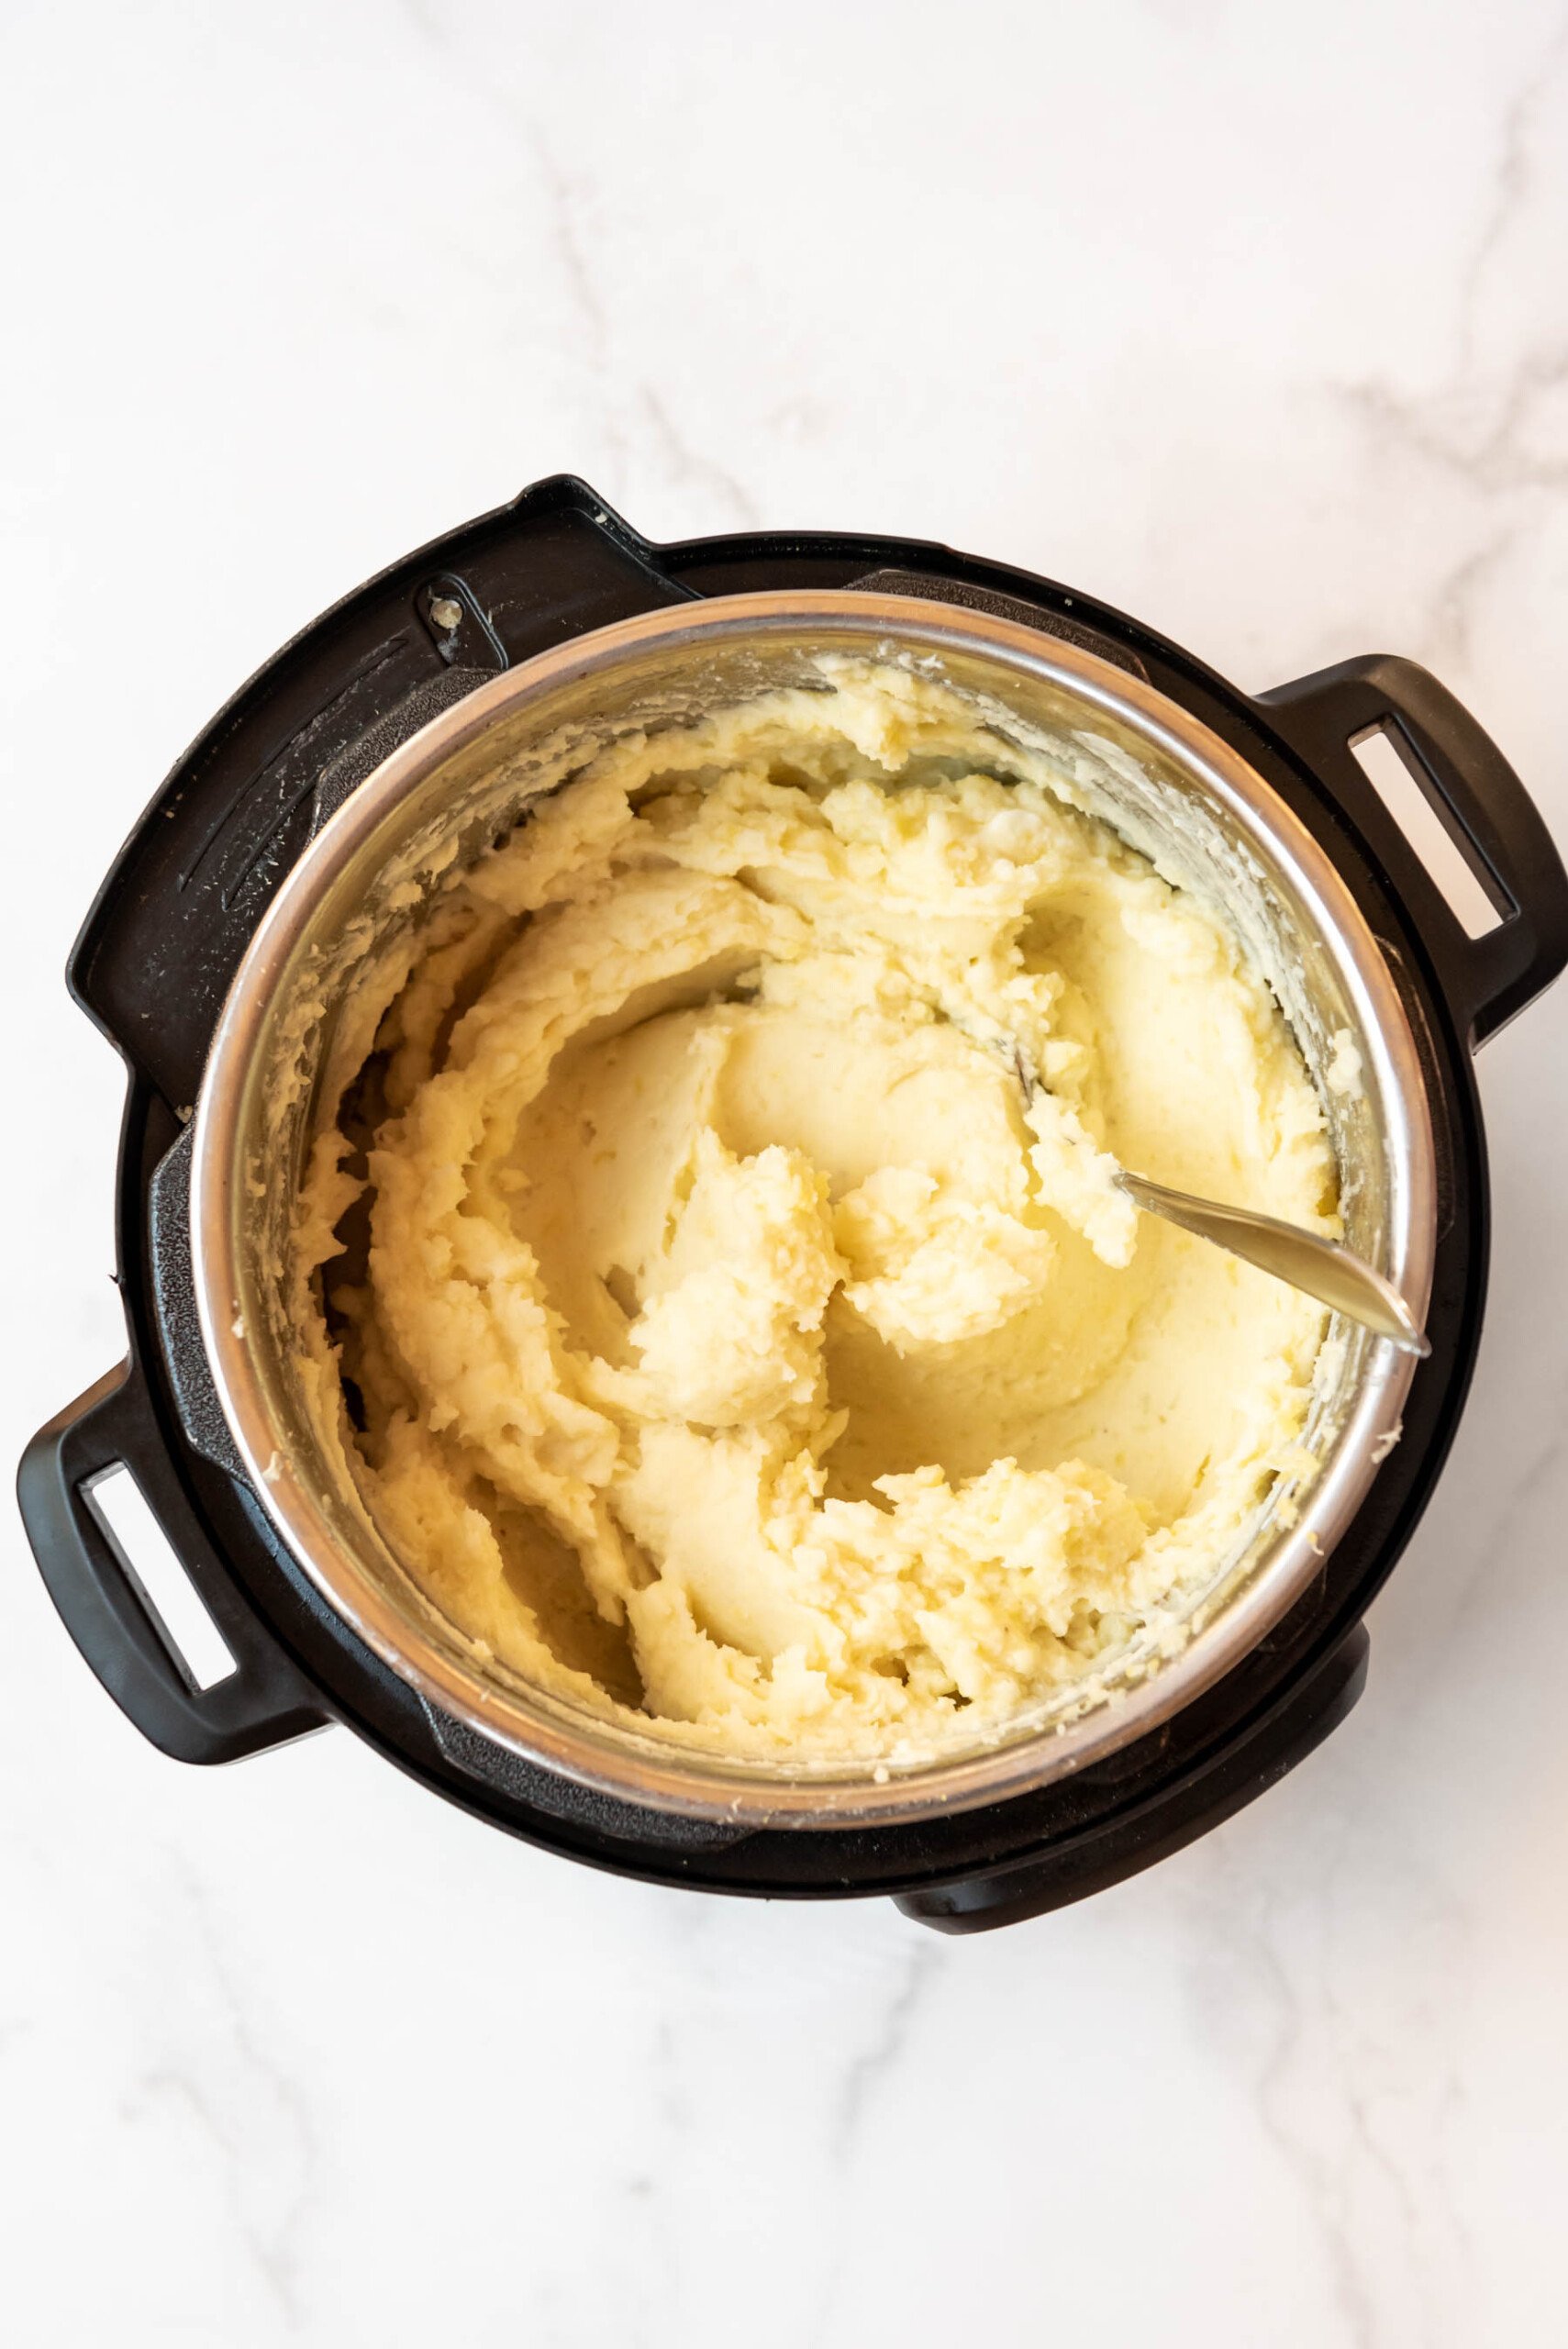 Top view of creamy mashed potatoes in an instant pot.